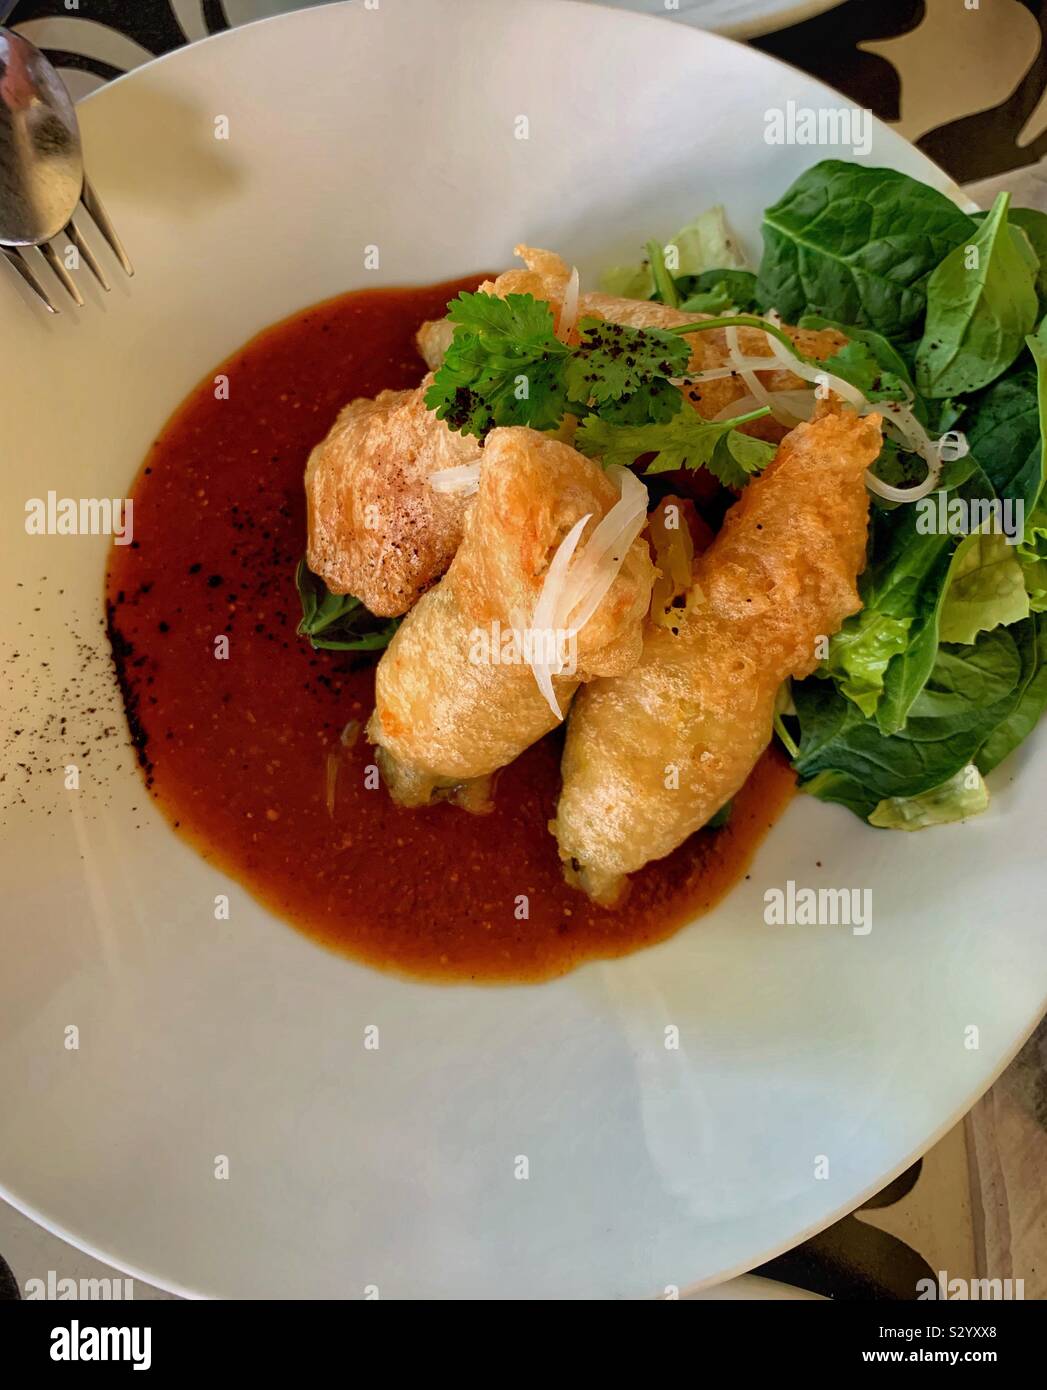 Zucchini blossoms are stuffed with Oaxaca cheese, fried and served over a mole sauce at Apoala in Mérida, Mexico for a delicious appetizer. Stock Photo